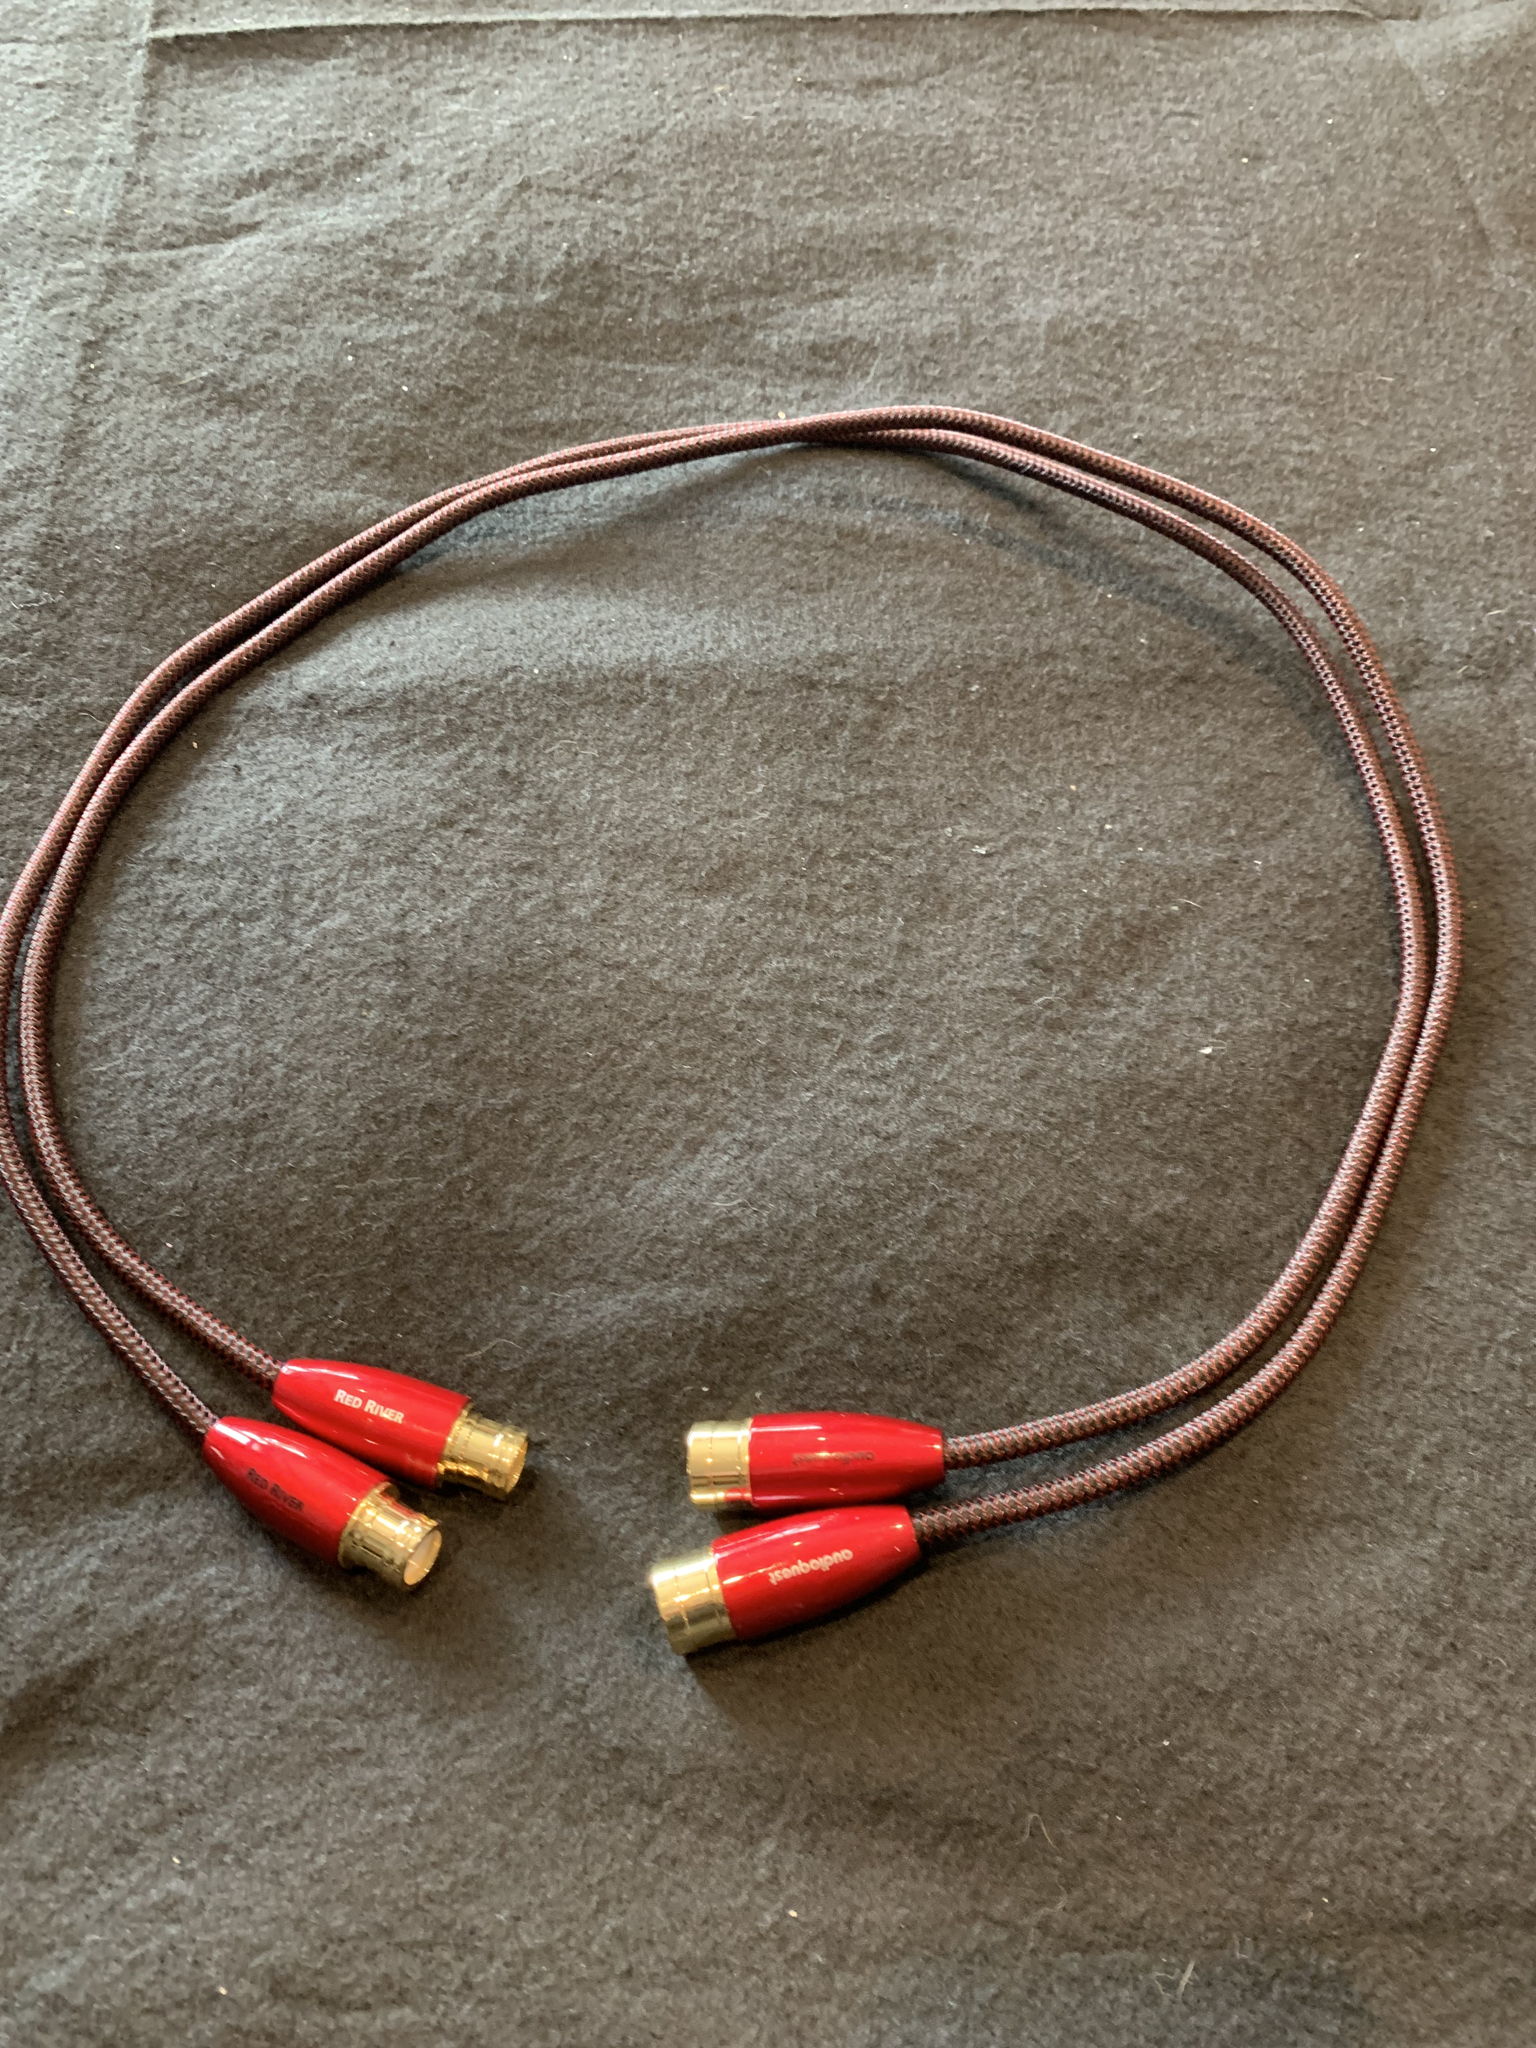 AudioQuest Red River 1m XLR to XLR Interconnects Looks ... 4